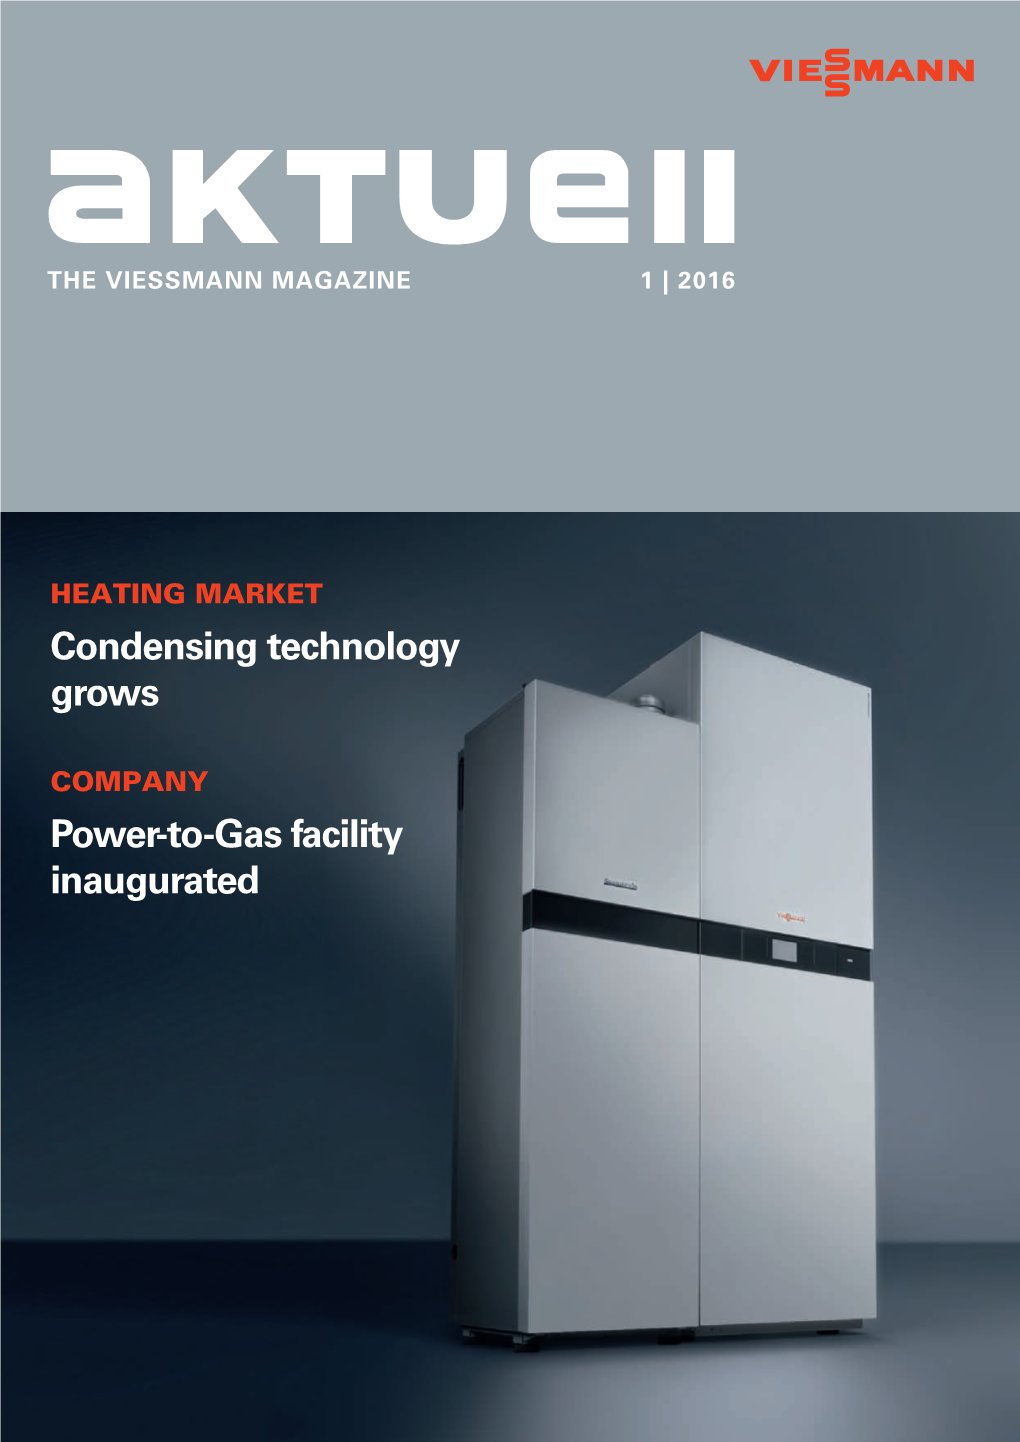 HEATING MARKET Condensing Technology Grows 1 COMPANY Power-To-Gas Facility Inaugurated 2 CONTENTS